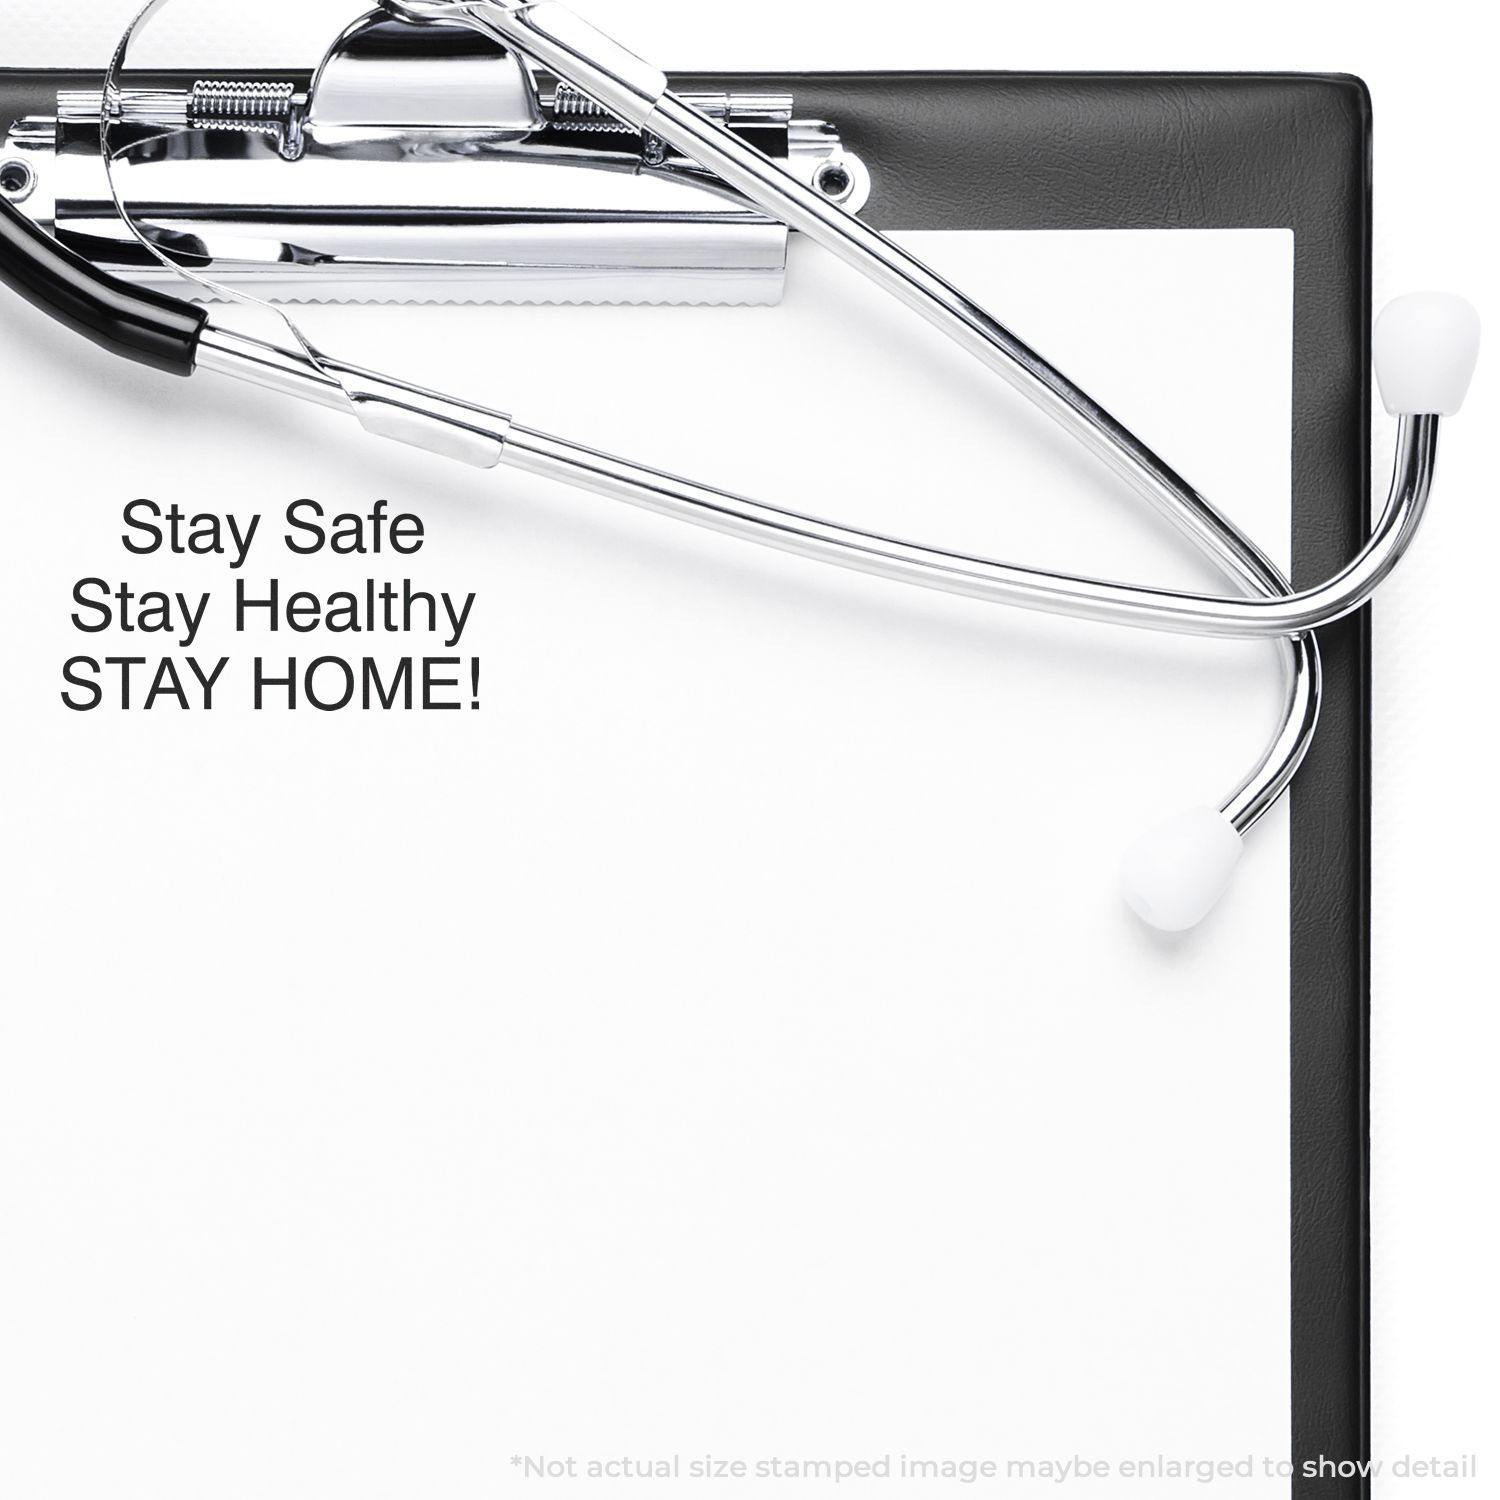 A self-inking stamp with a stamped image showing how the text "Stay Safe Stay Healthy STAY HOME!" is displayed after stamping.